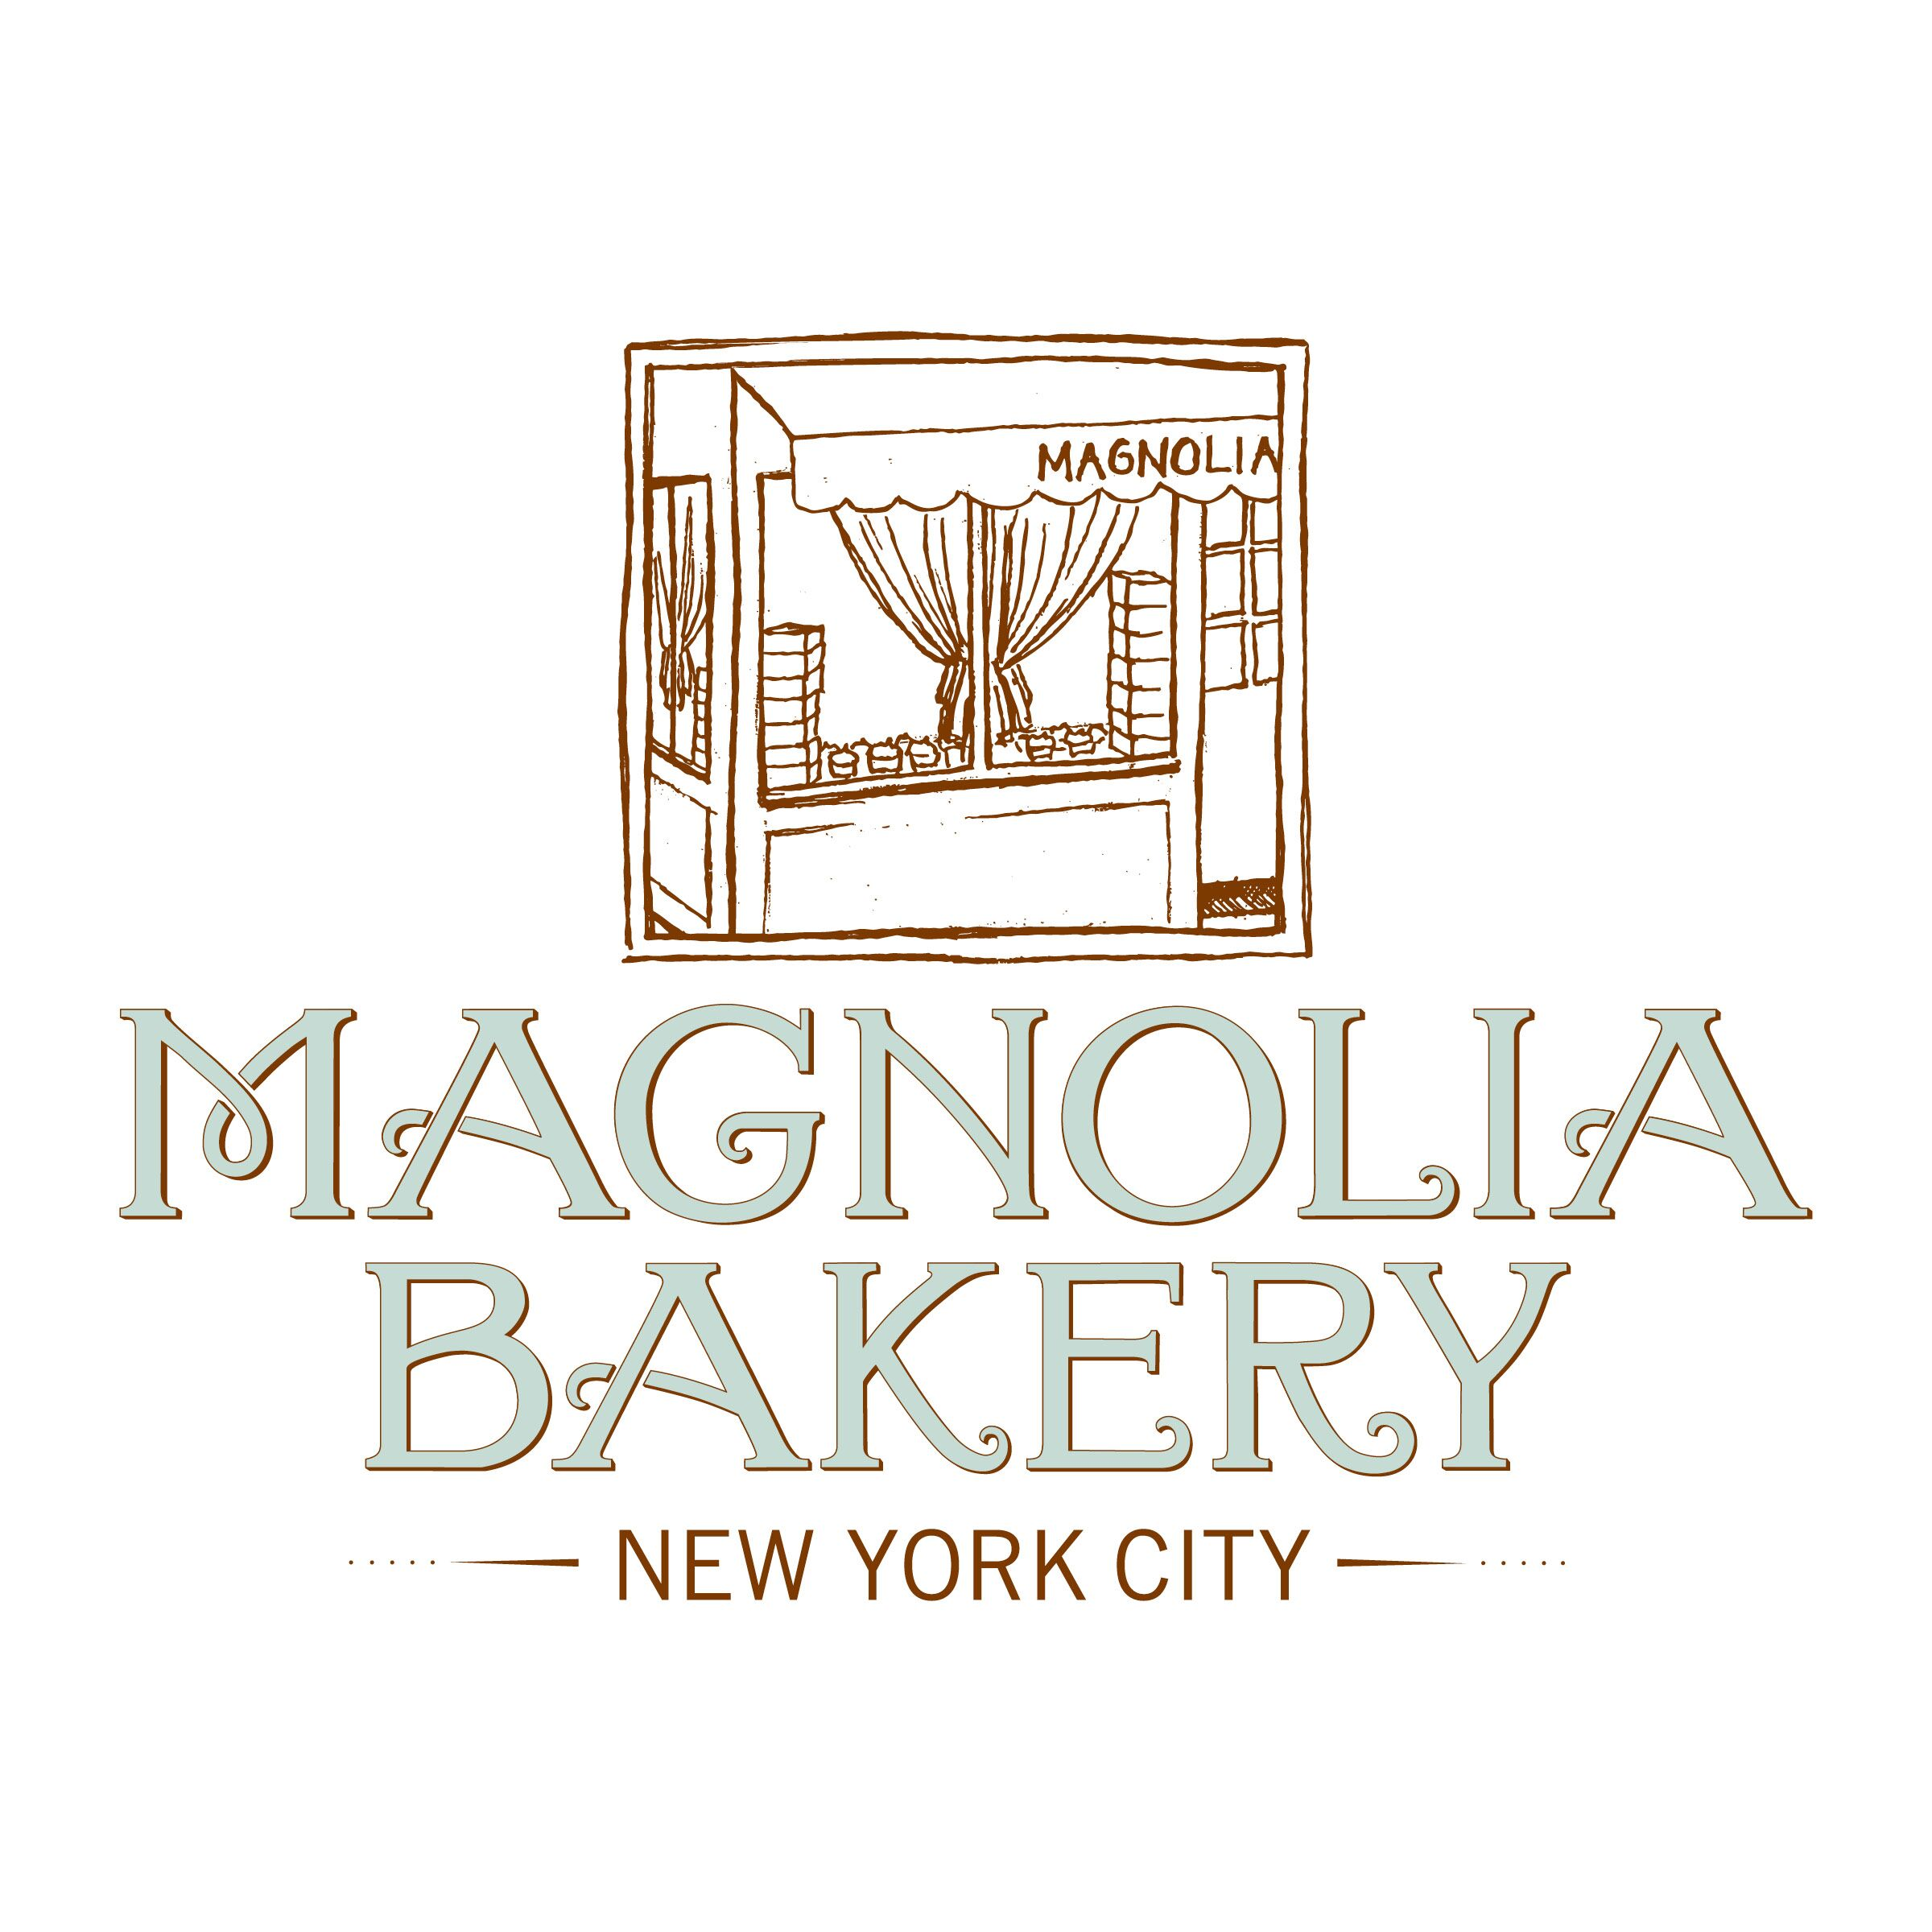 Magnolia Bakery opened its first store in New York City's West Village in 1996 and today can be found in New York City, Boston, Chicago, LA and Washington, D.C. in the U.S., as well as franchise locations throughout the Middle East and in the Philippines and India. Renowned for its classic American desserts, Magnolia Bakery serves freshly-baked cupcakes, cakes, cheesecakes, pies, cookies, brownies and bars and our world famous banana pudding, all made in small batches throughout the day at each location. In addition to what's offered in store, Magnolia Bakery ships some of its most popular desserts across the U.S., including banana pudding, cakes and cupcakes. The bakery also offers custom cakes, cupcakes and more through its Cake Salon, including tiered wedding cakes. To learn more about Magnolia Bakery, follow @magnoliabakery.